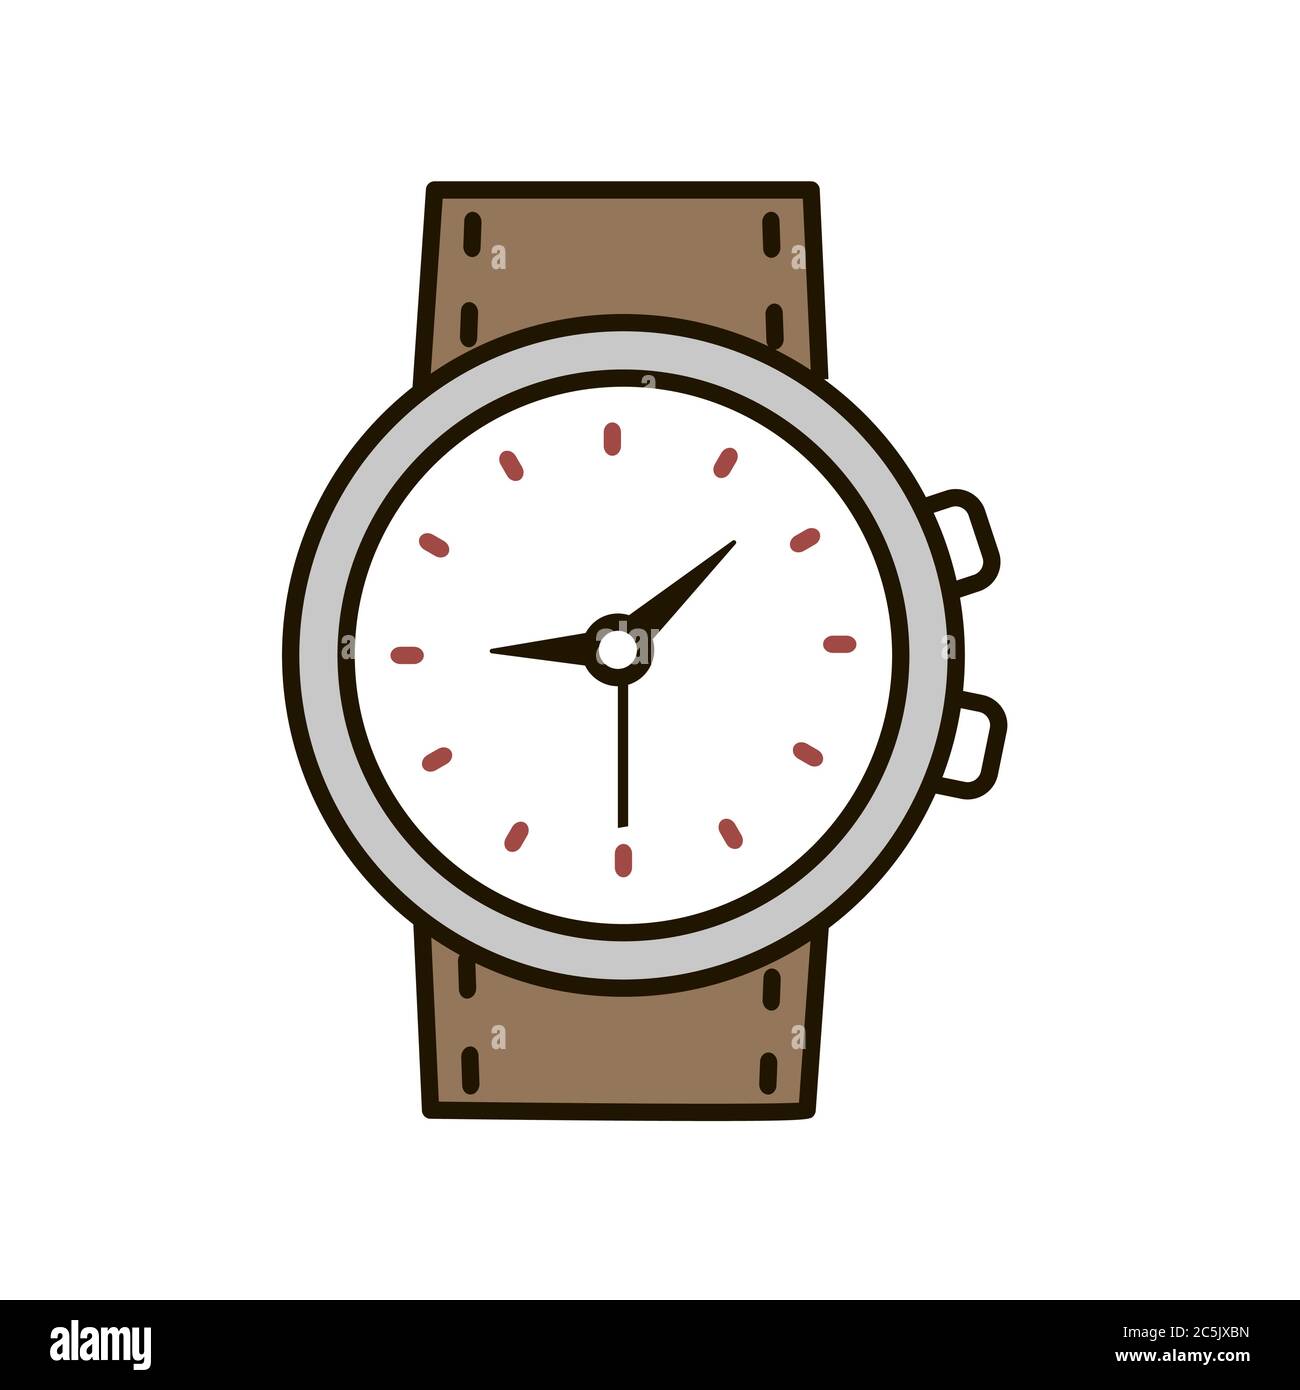 mens watch on white background vector illustration in trendy flat style esp 10 2C5JXBN